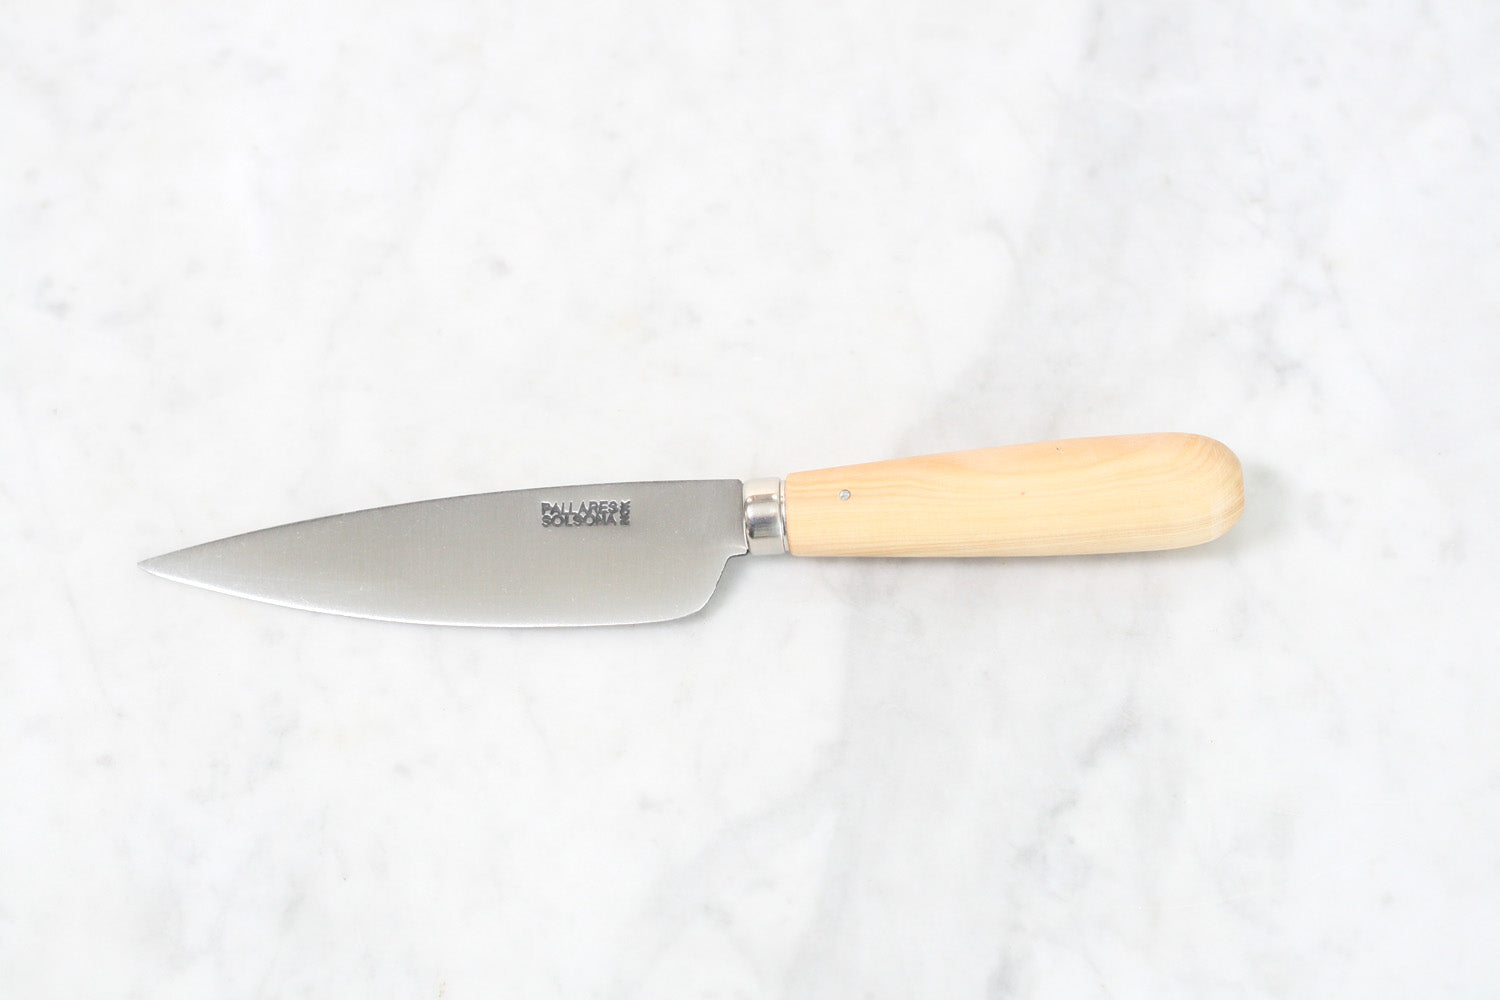 Pallarès Solsona Utility Knife, Stainless